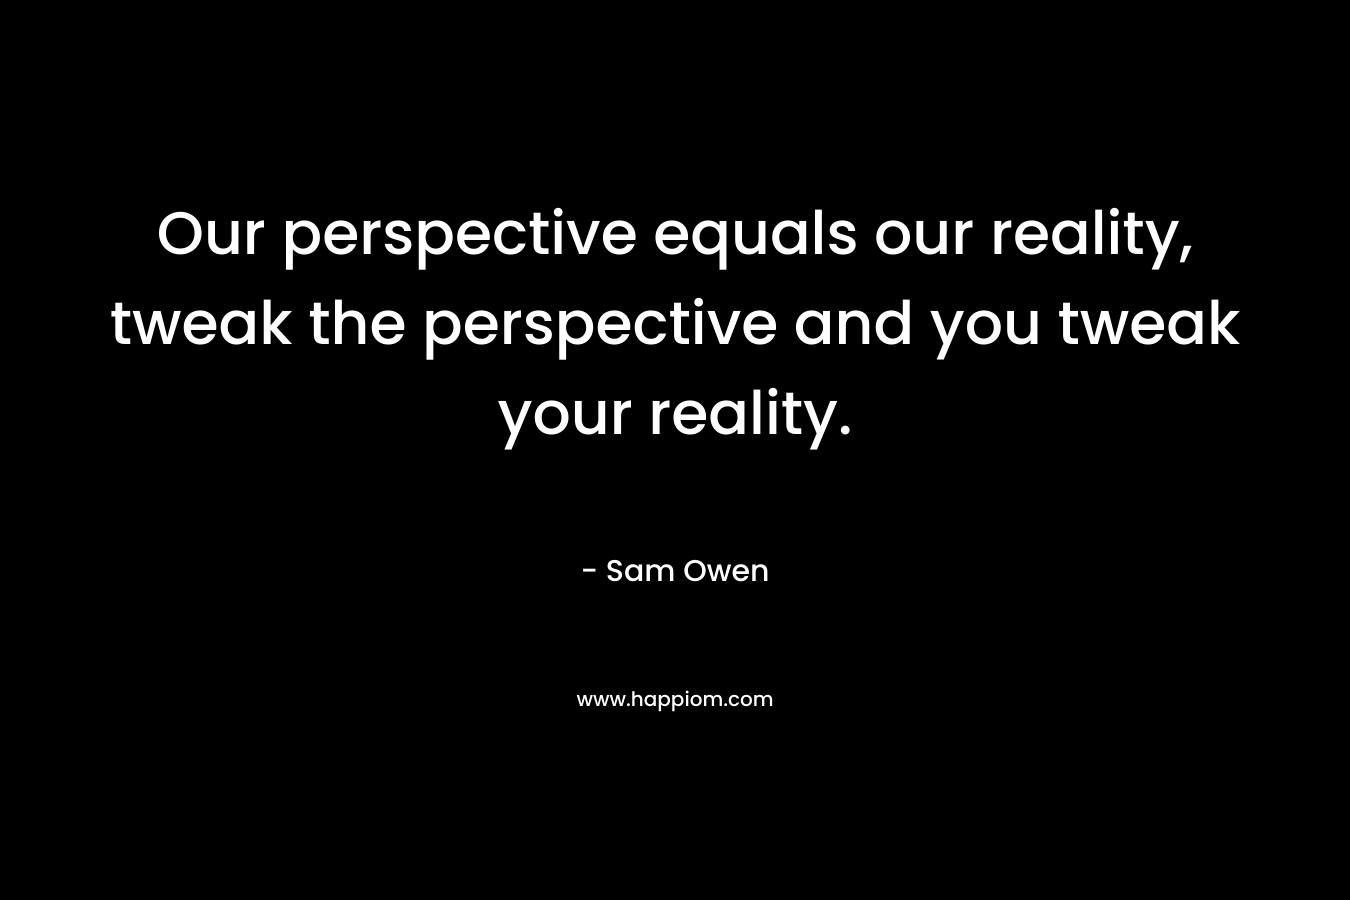 Our perspective equals our reality, tweak the perspective and you tweak your reality.